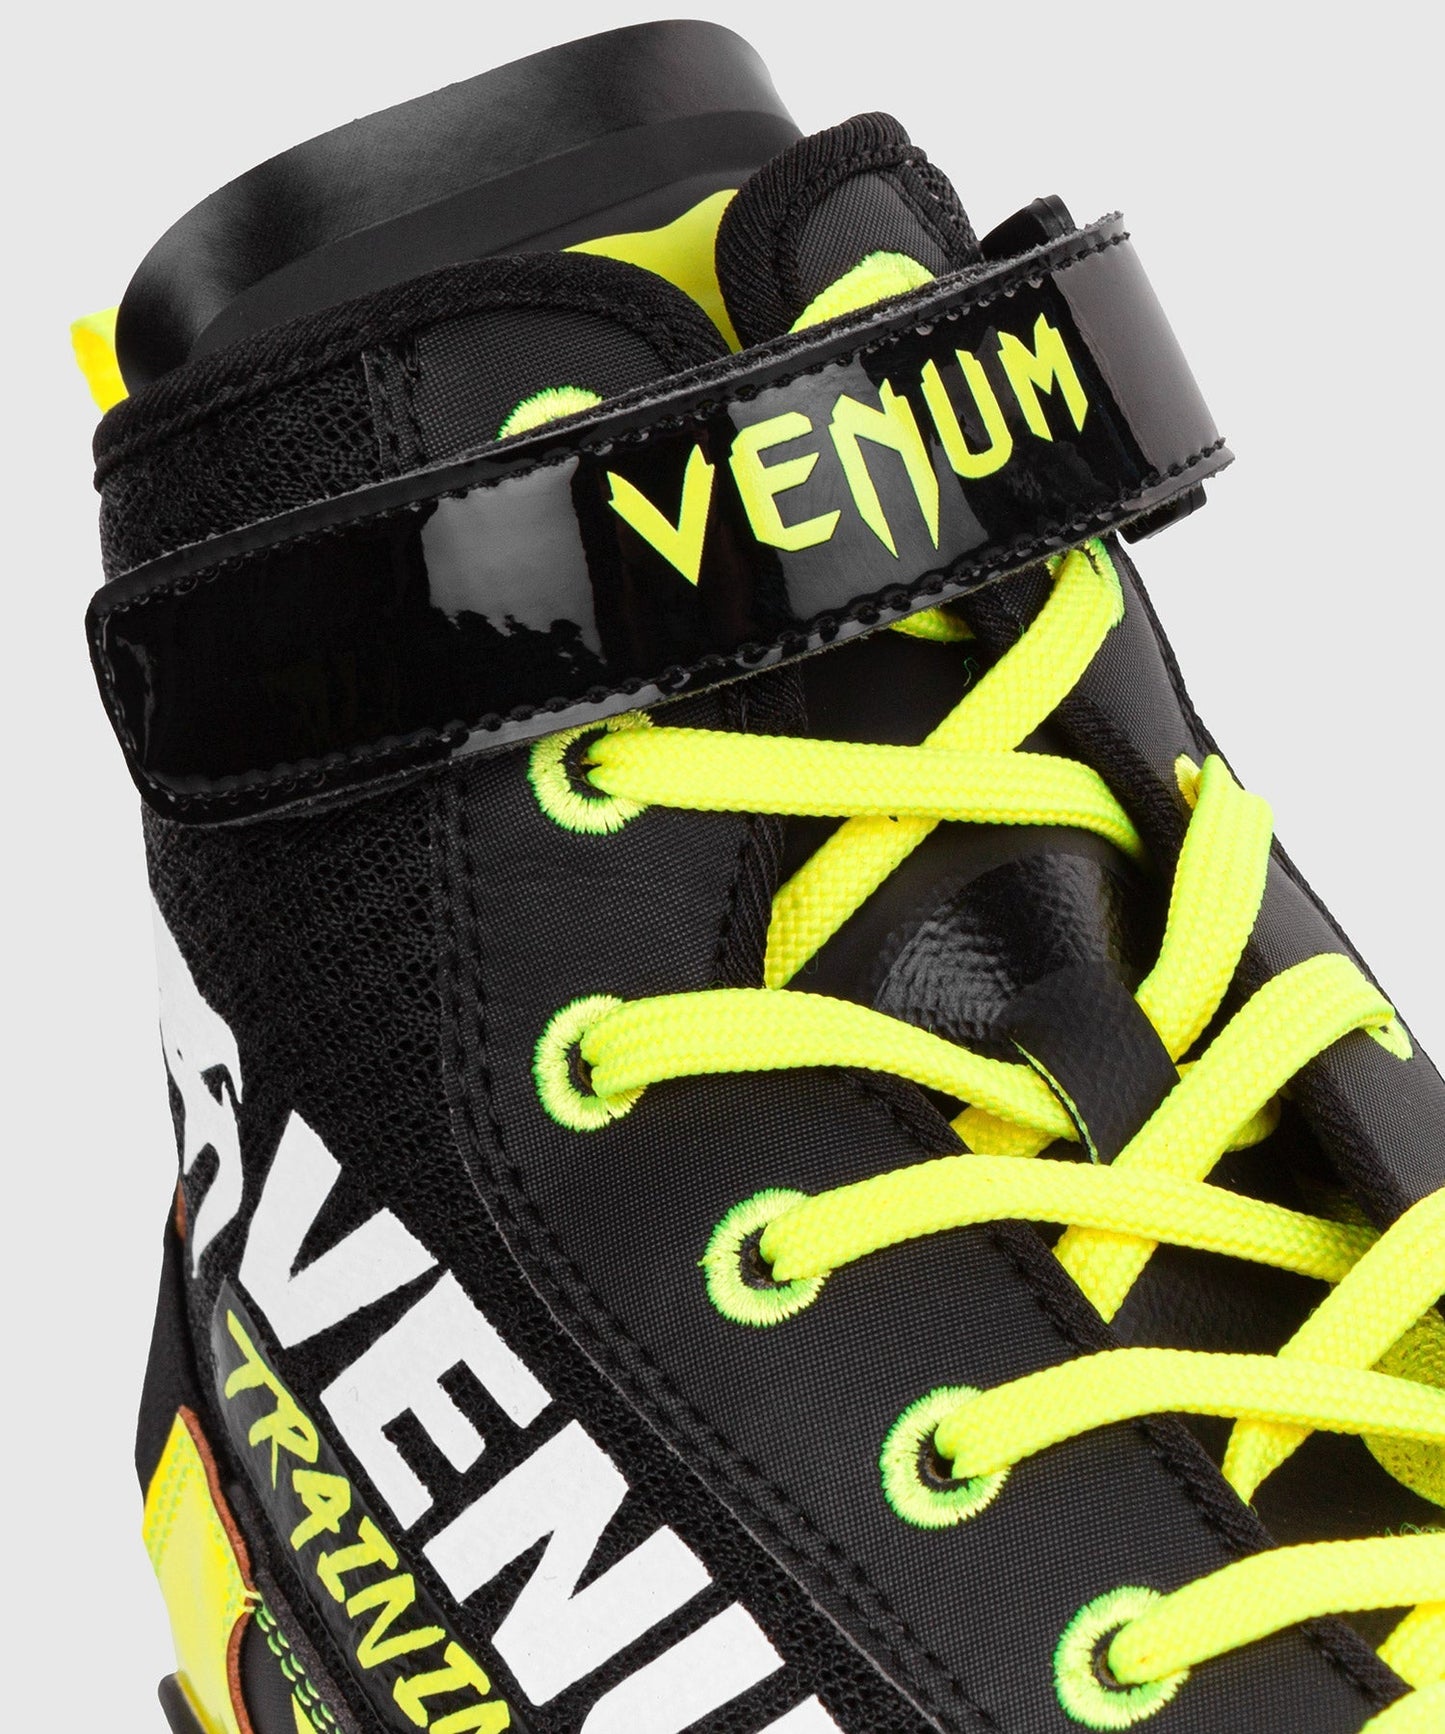 Venum Giant Low VTC 2 Edition Boxing Shoes - Black/Neo Yellow